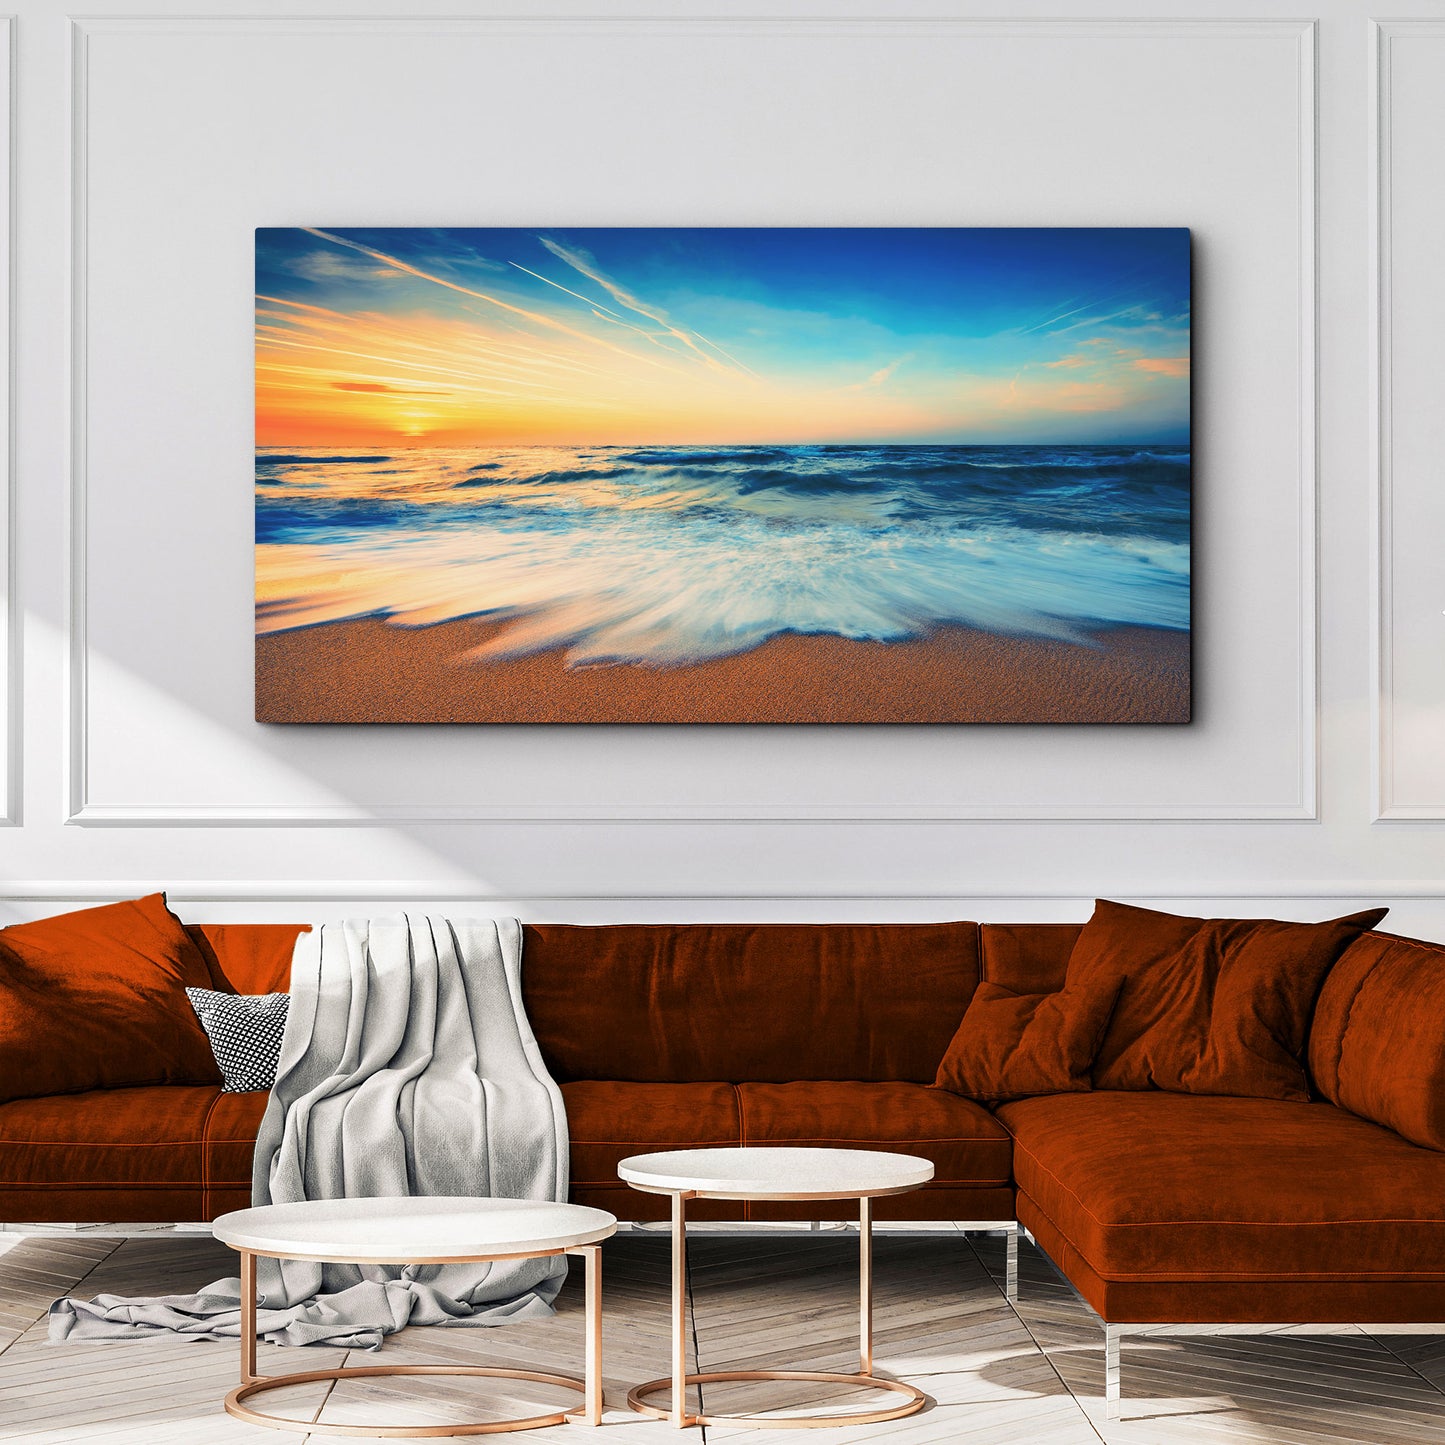 Ocean Beach Sunset Canvas Wall Art Style 2 - Image by Tailored Canvases